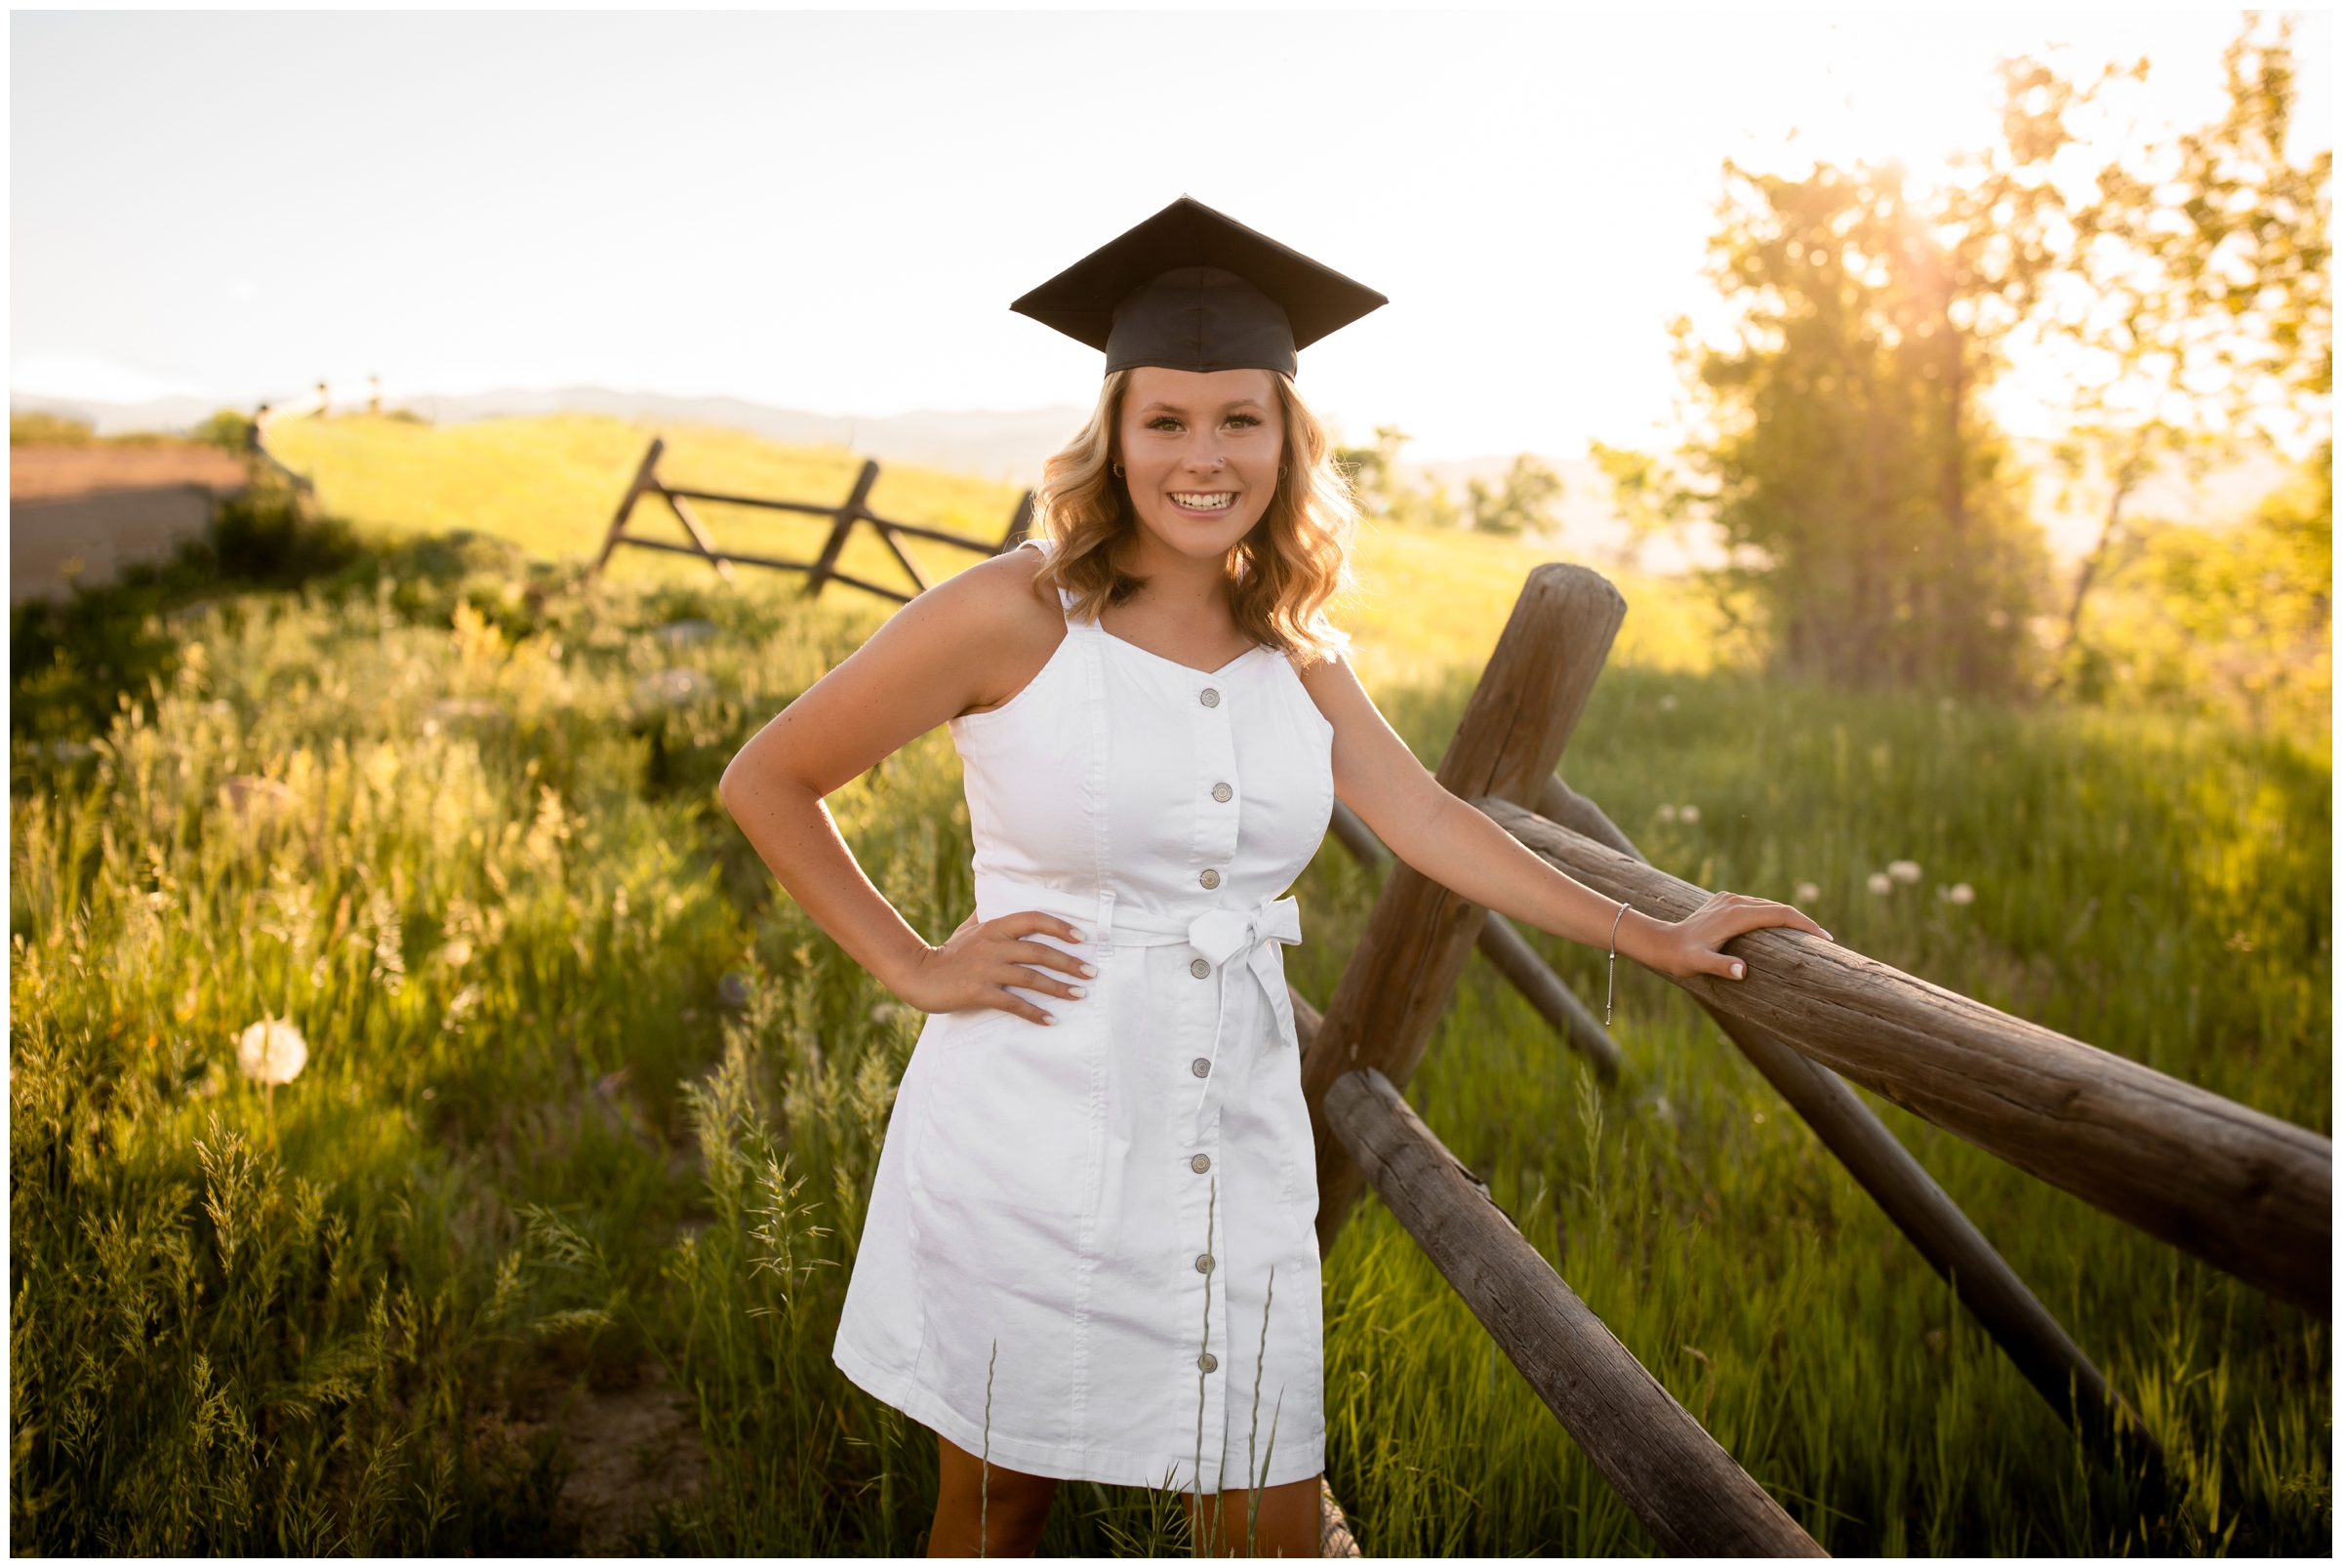 Cap and gown photography inspiration at coot lake in boulder Colorado 